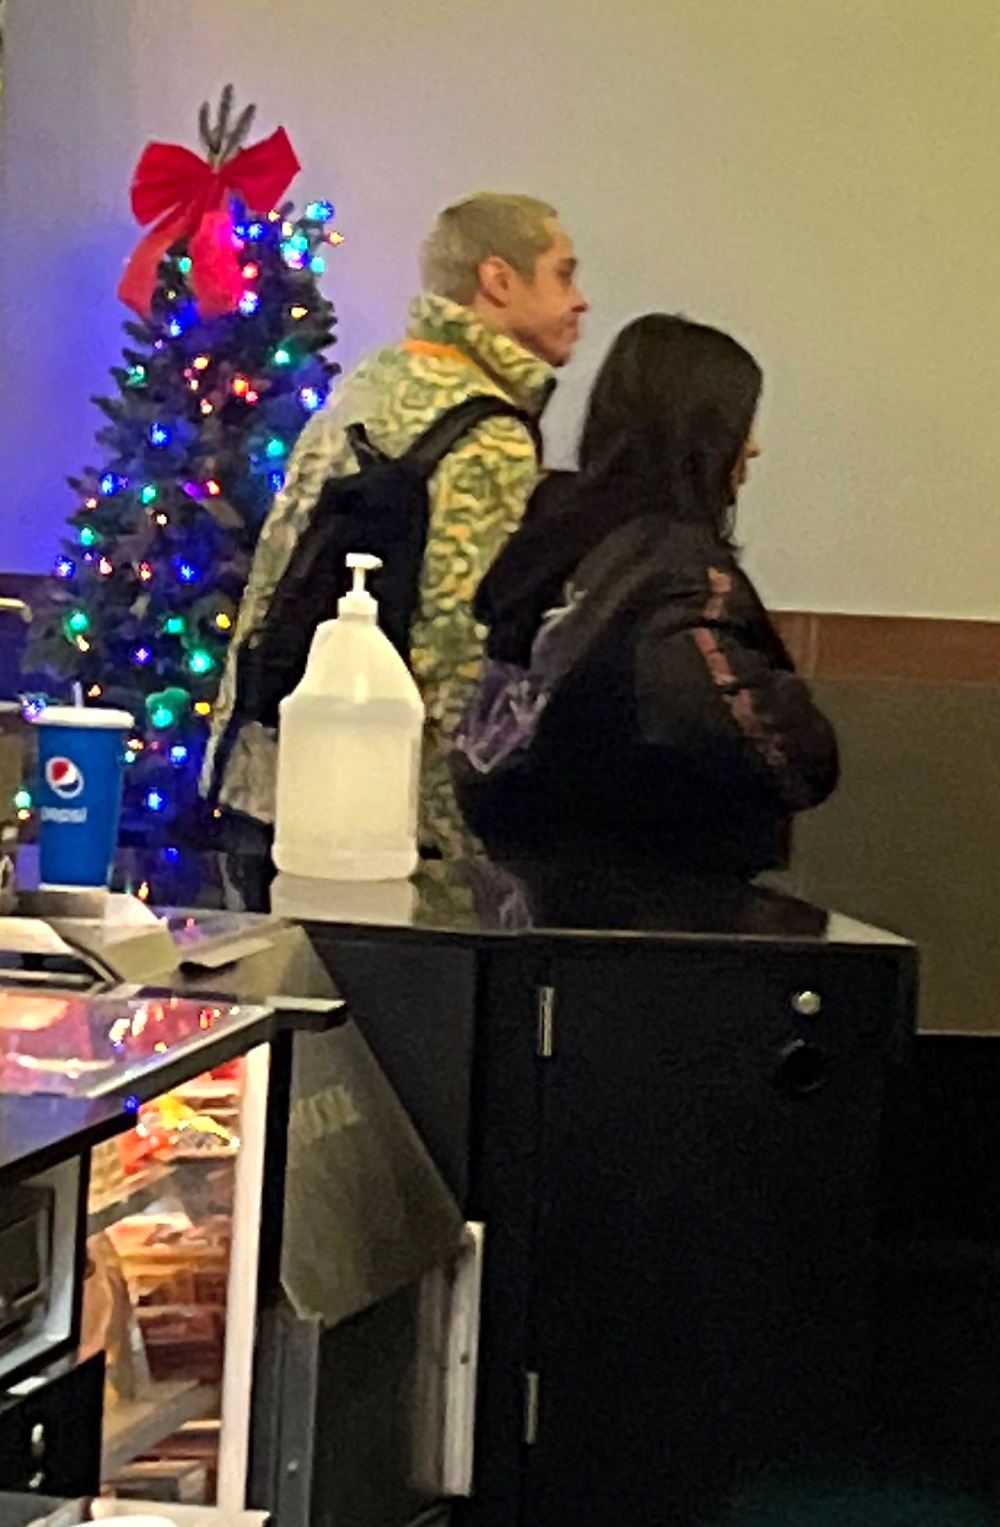 Kim Kardashian and Pete Davidson Have Movie Theater Date in Staten Island Amid Downsized ‘SNL’